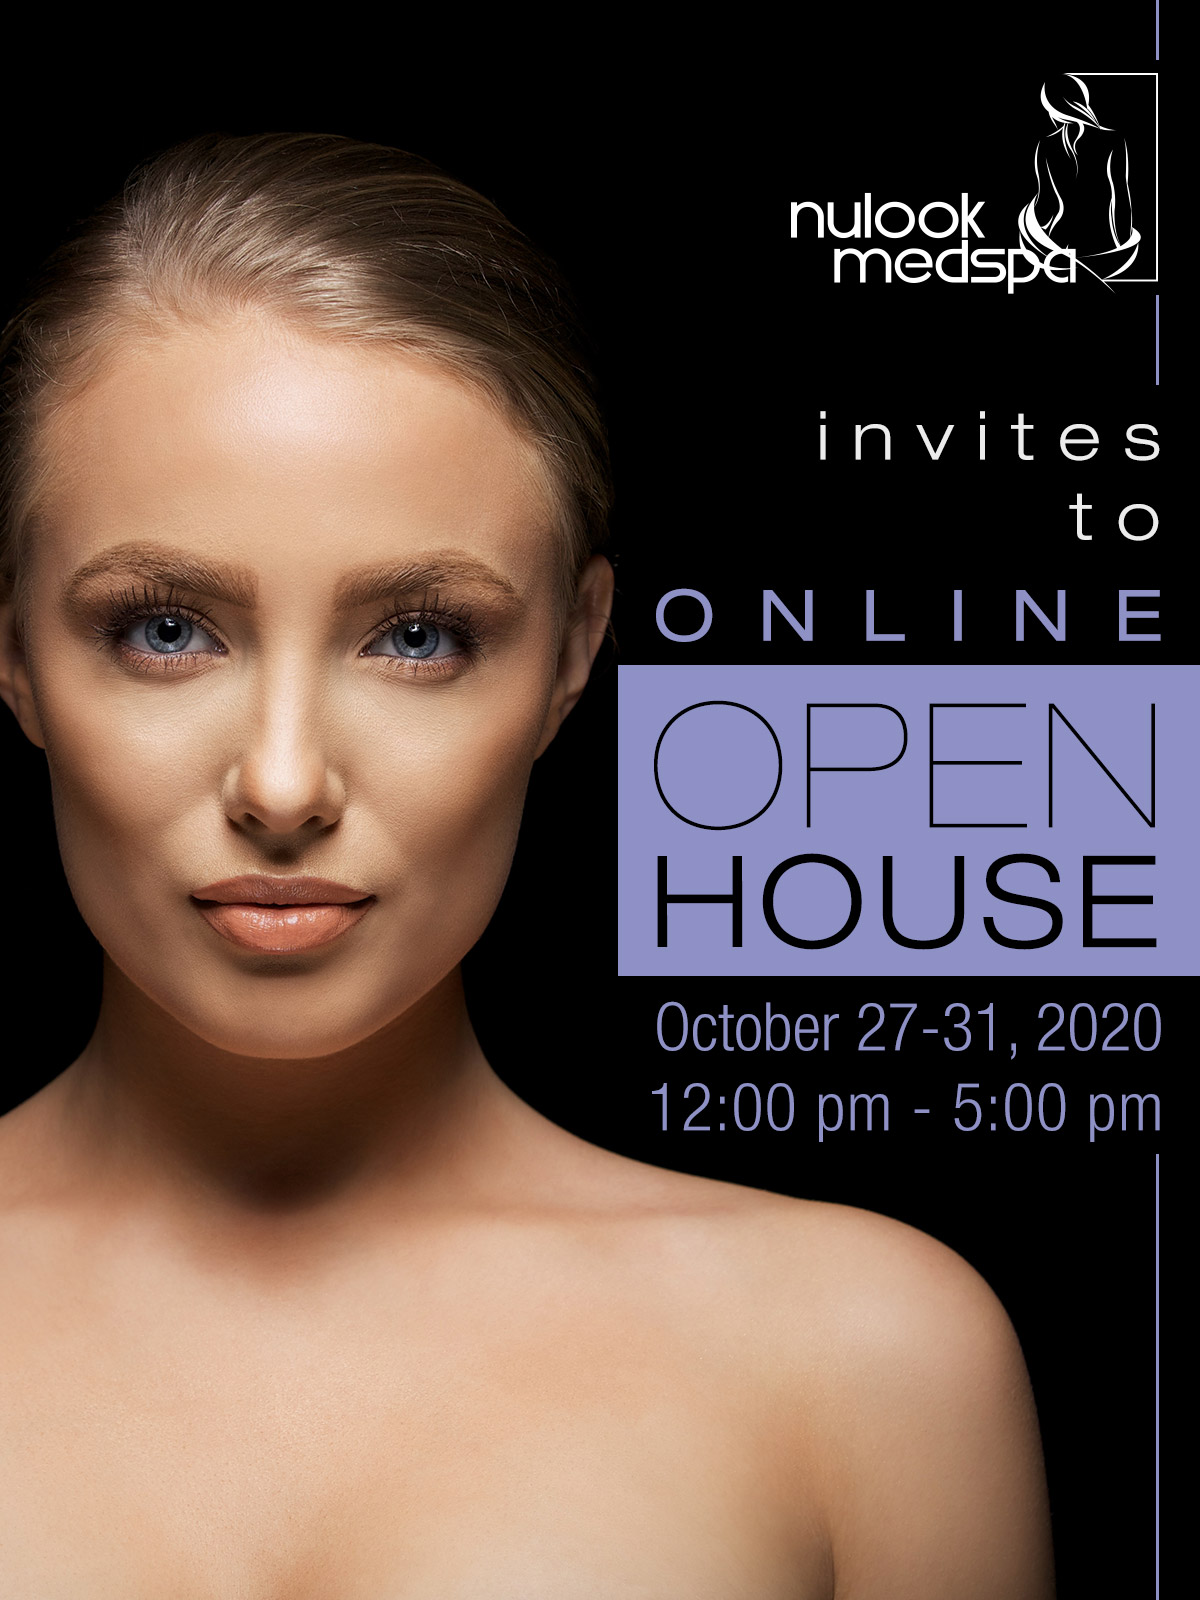 We would like to invite you to our ONLINE OPEN HOUSE